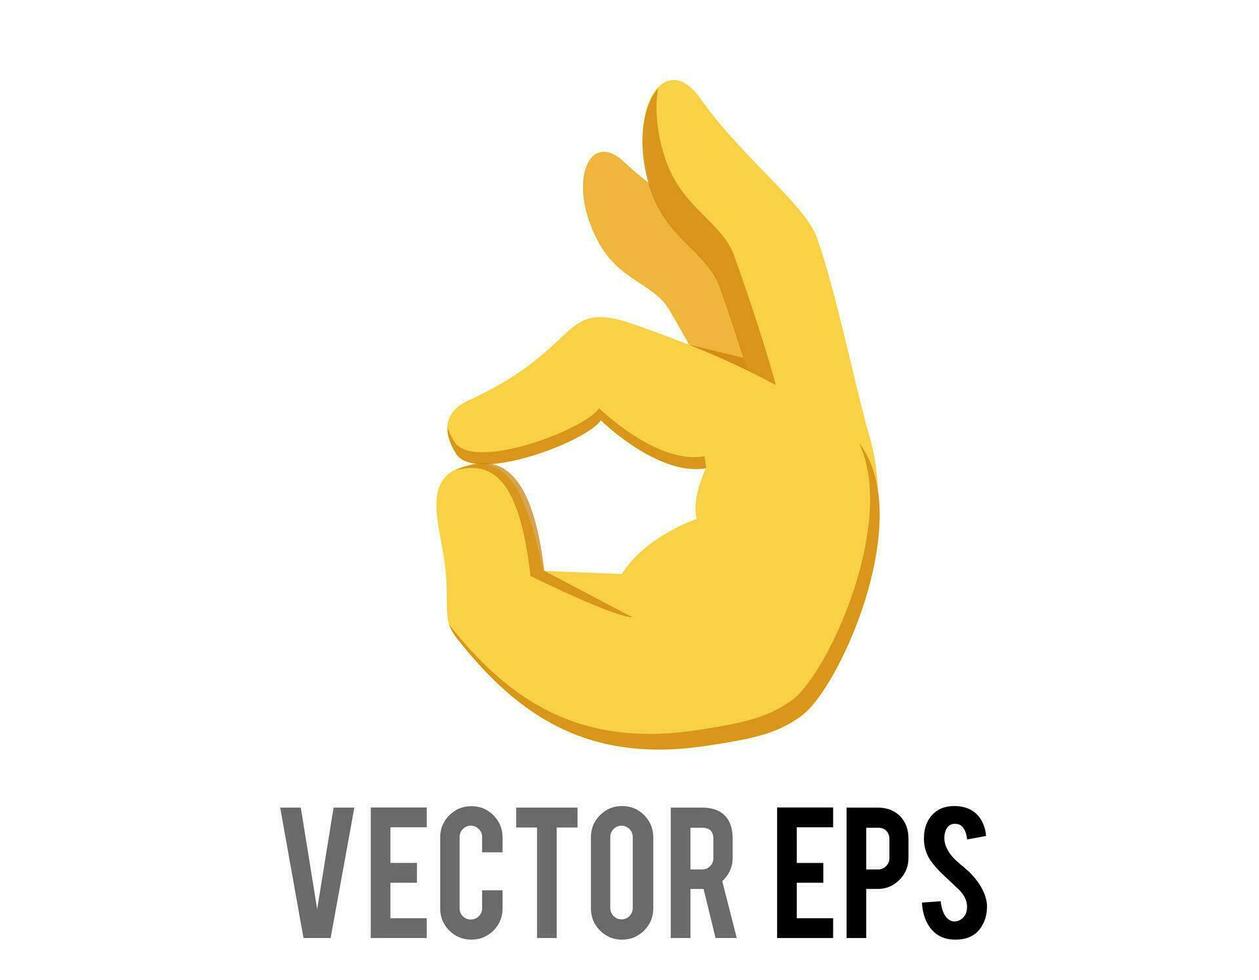 Vector gesture finger okay icon, represents yes, correct, good